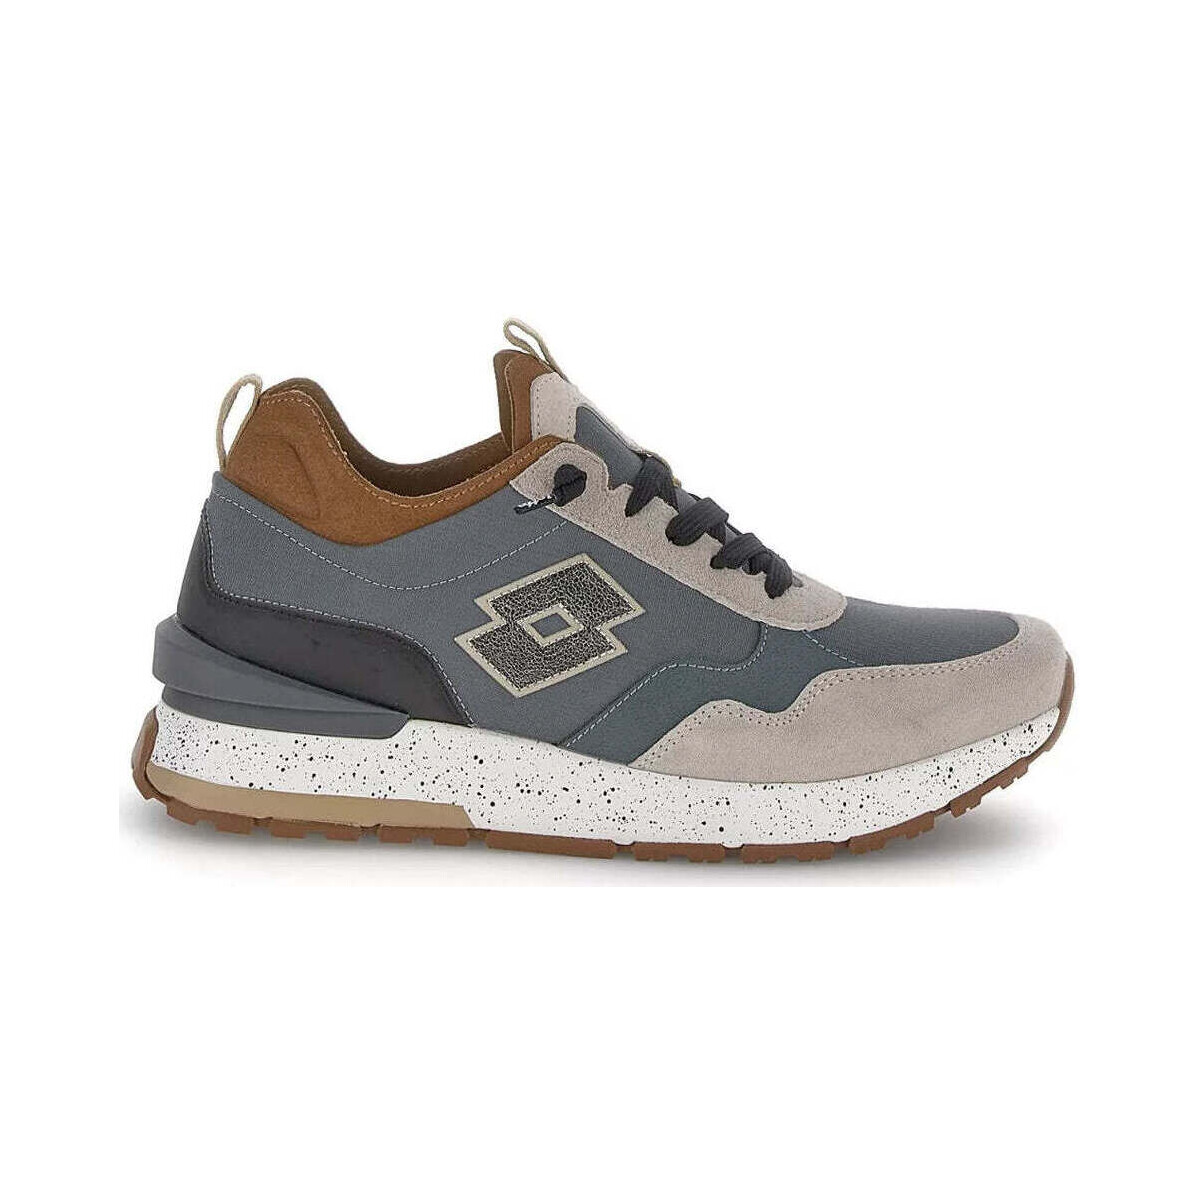 Chaussures Homme Baskets mode Lotto  Gris